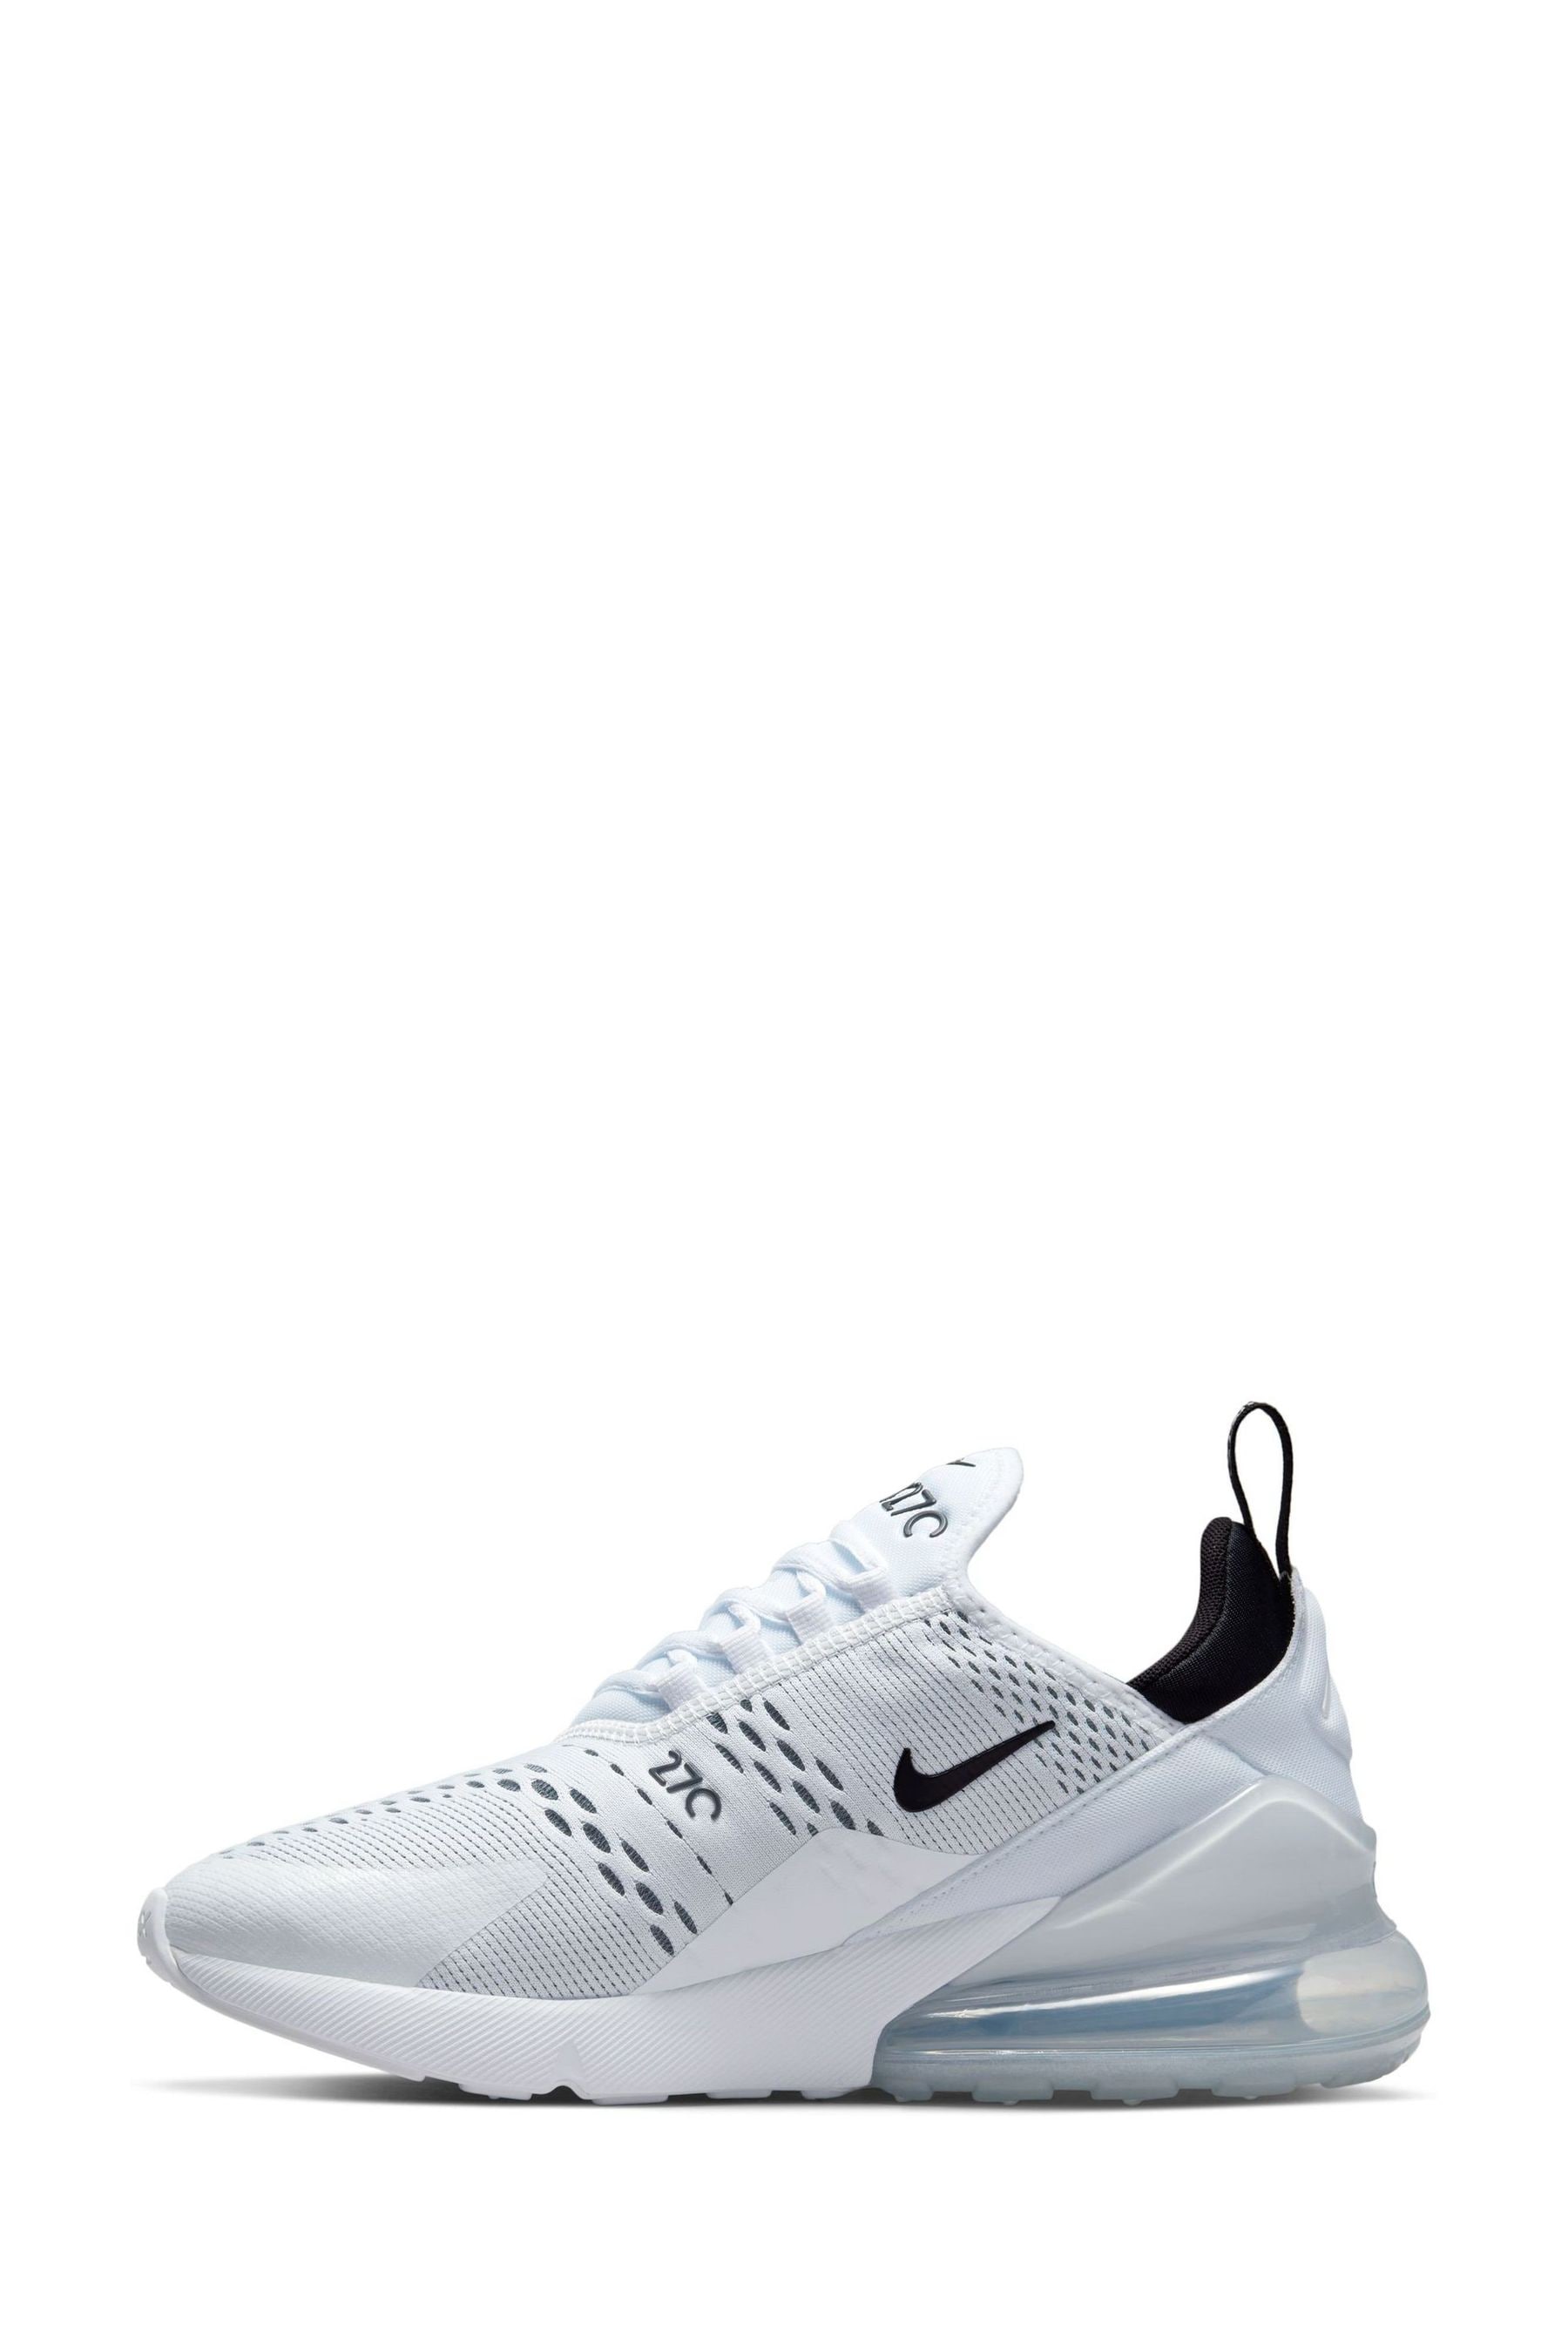 Buy Nike White Air Max 270 Trainers from the Next UK online shop